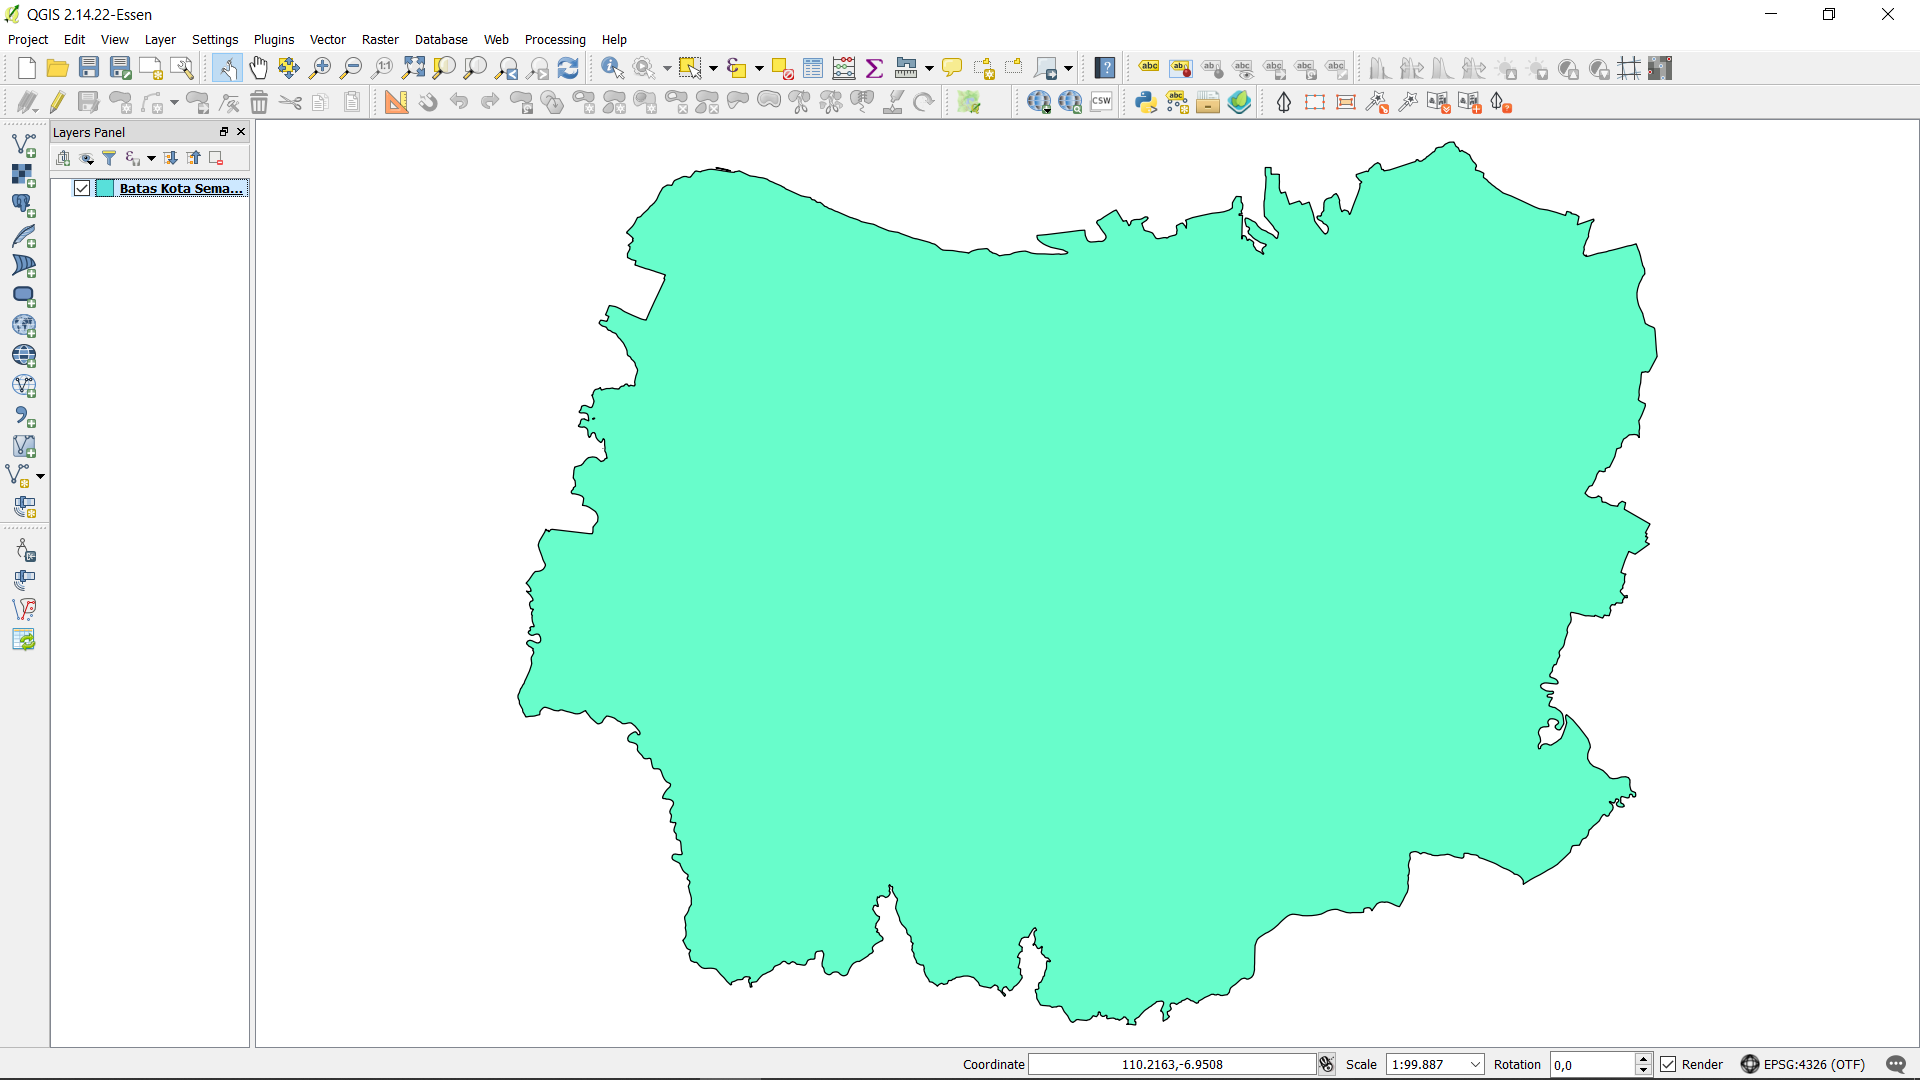 The display of shapefile data in QGIS